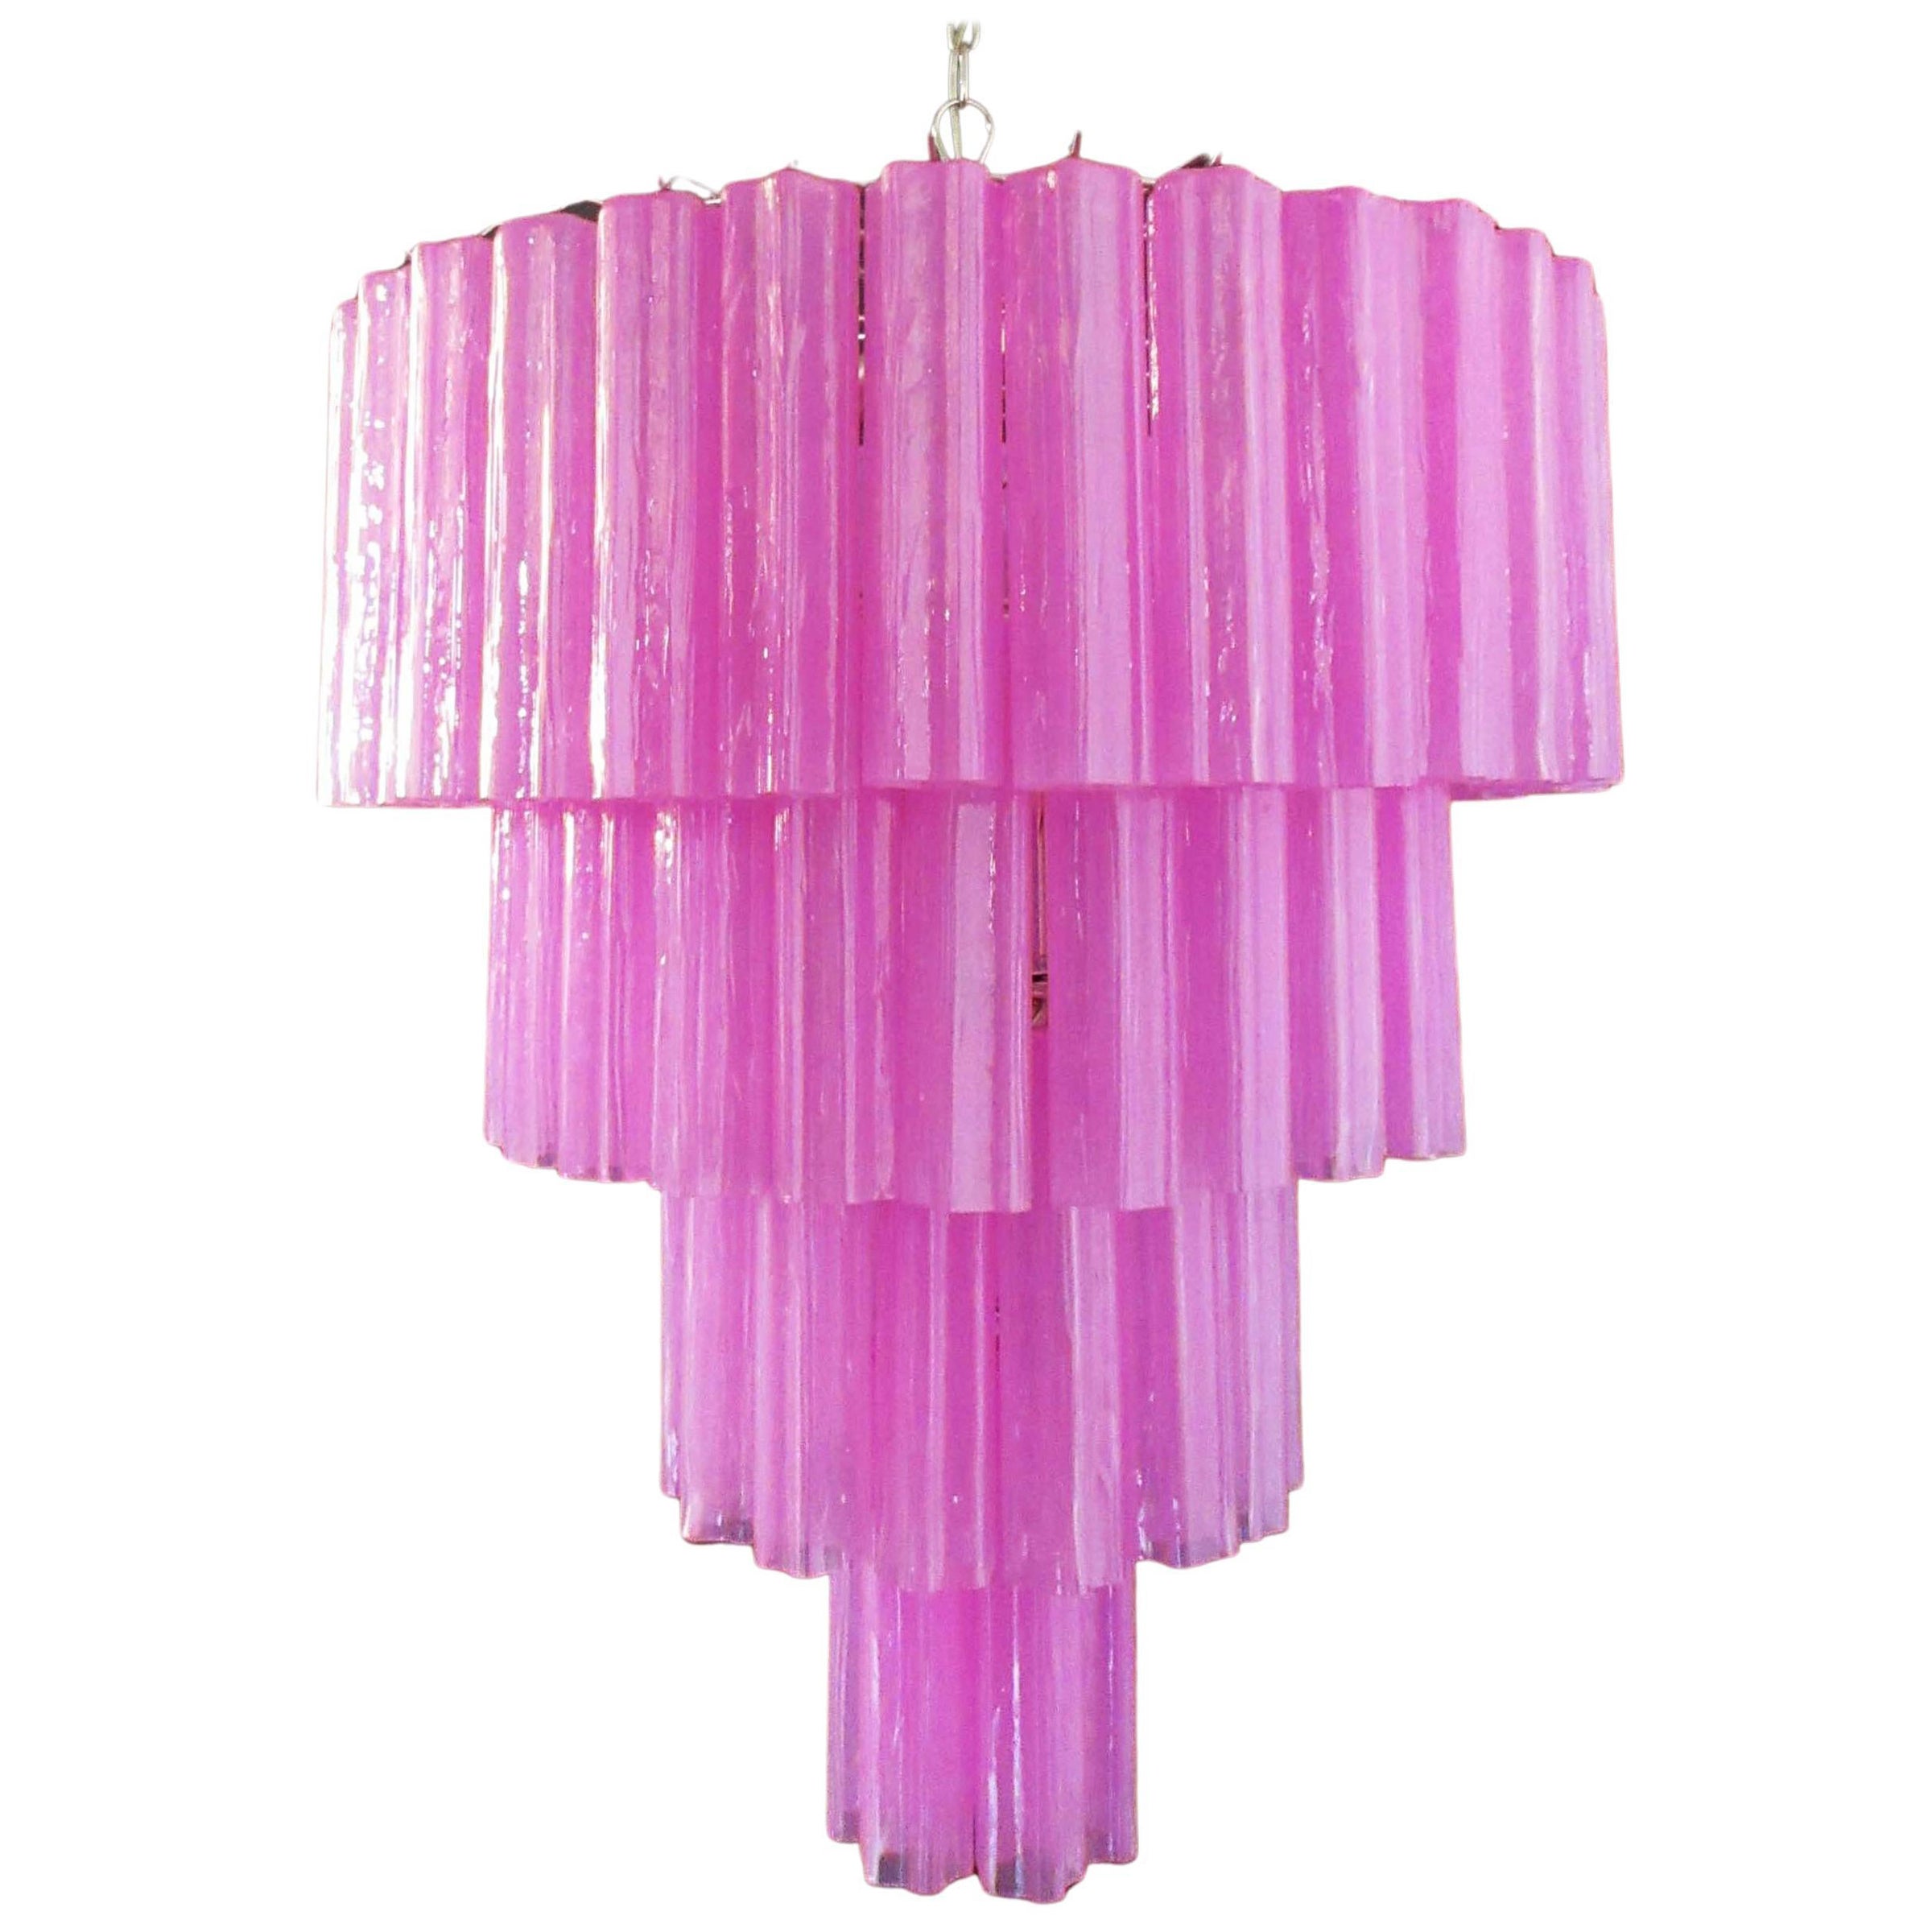 Huge Vintage Murano Glass Tiered Chandelier, 78 Glasses, Pink Fuxia Silk For Sale